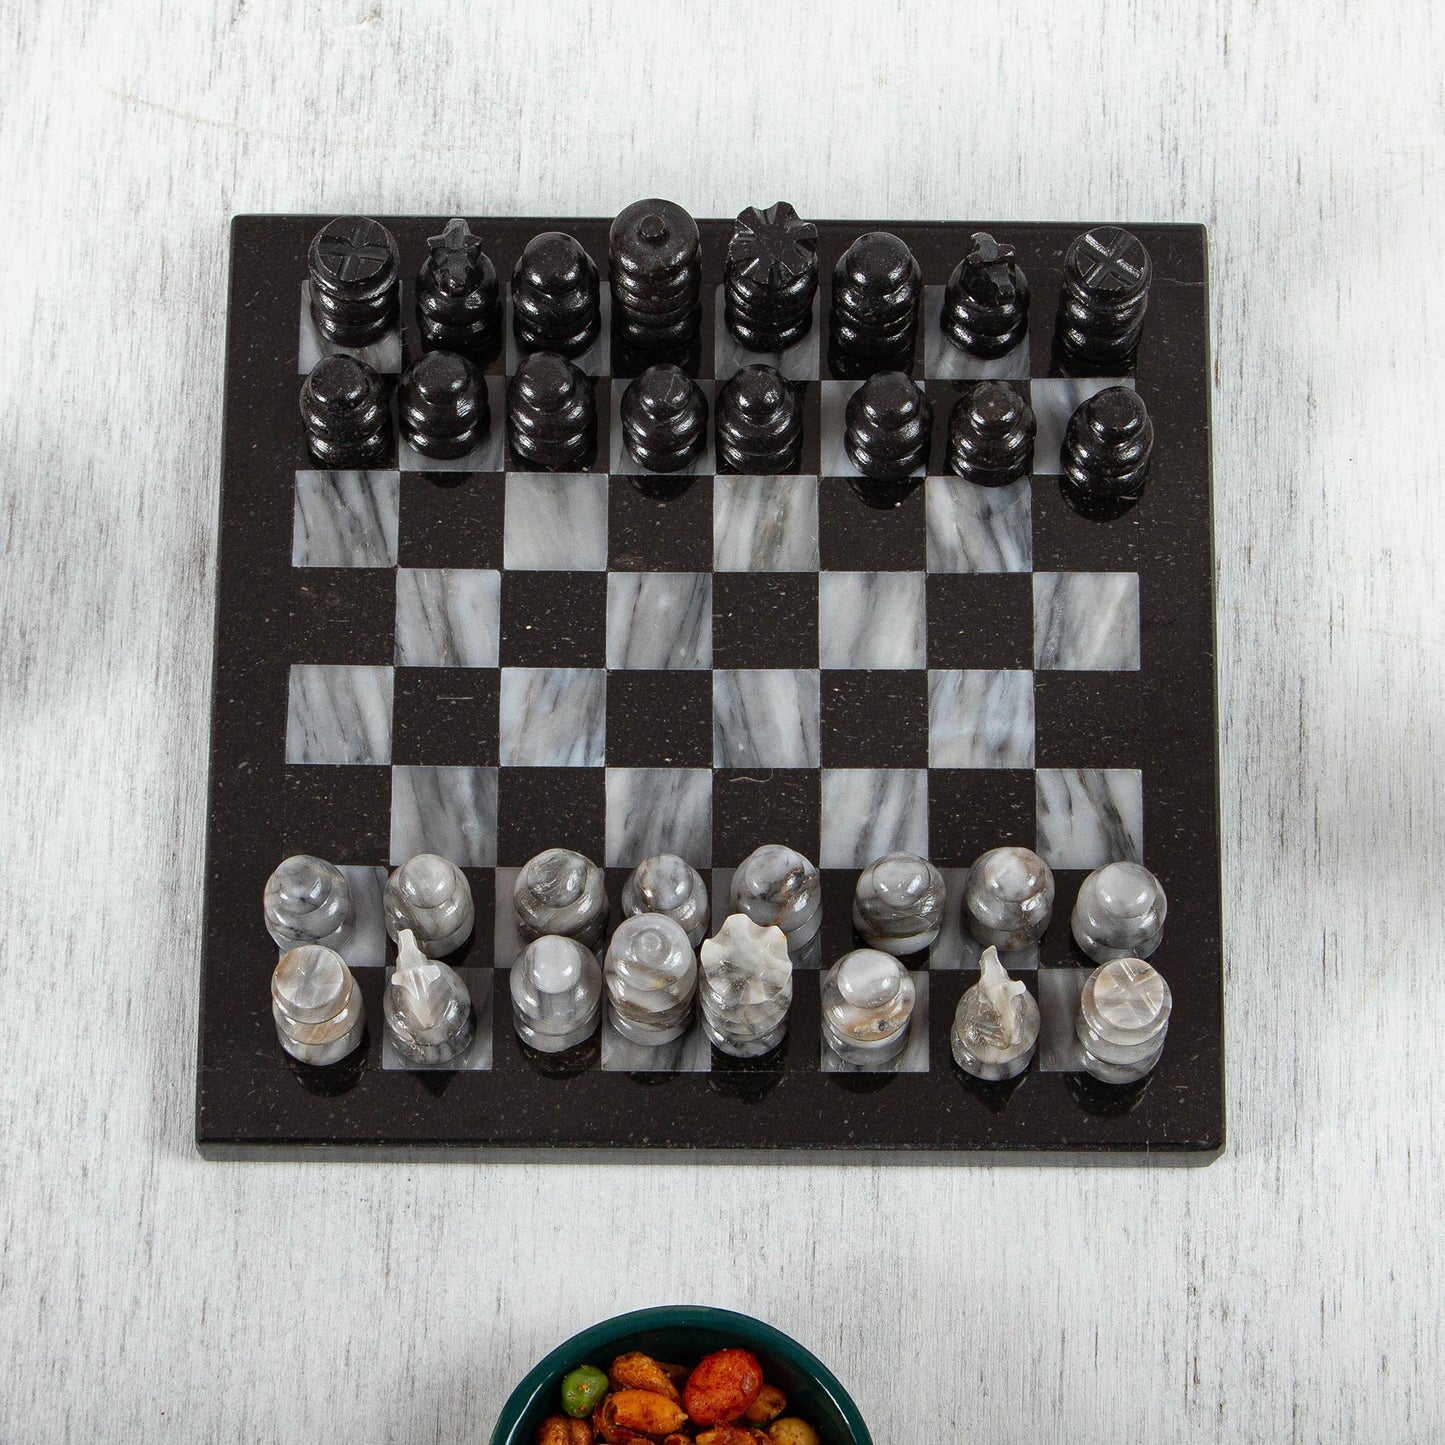 Black and Grey Challenge Marble Chess Set in Black and Grey from Mexico (7.5 in.)